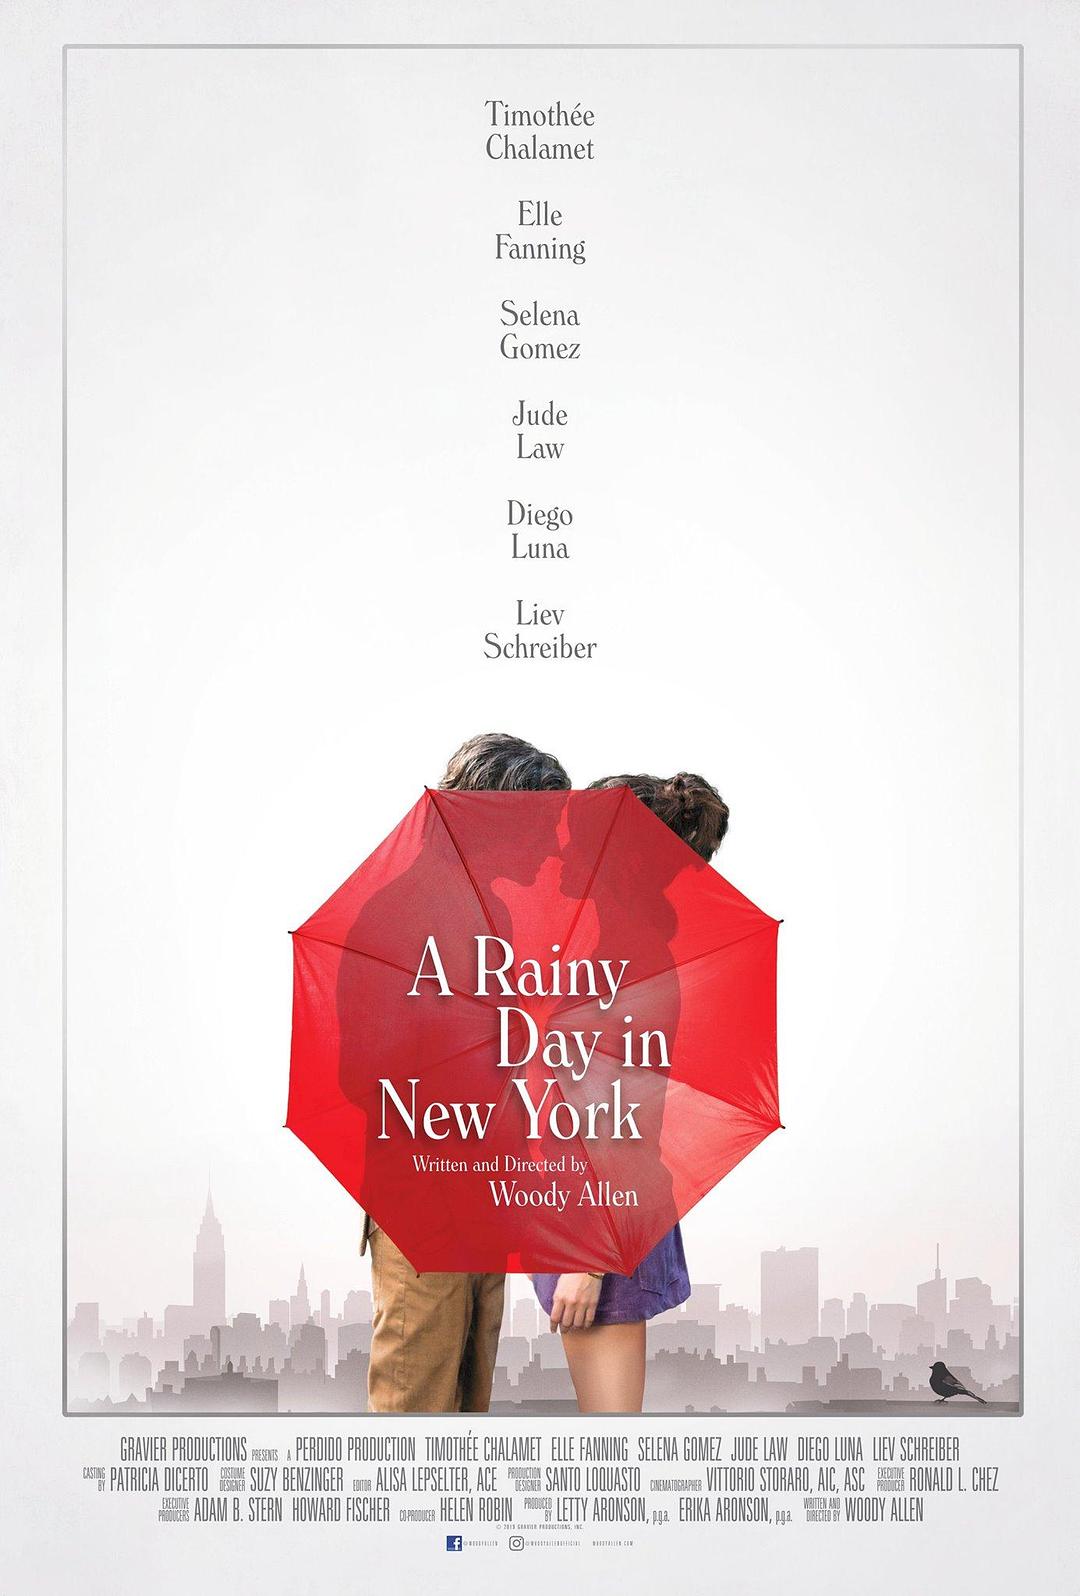 ŦԼһ/һŦԼ A.Rainy.Day.in.New.York.2019.720p.BluRay.x264.DTS-FGT 4.53GB-1.png